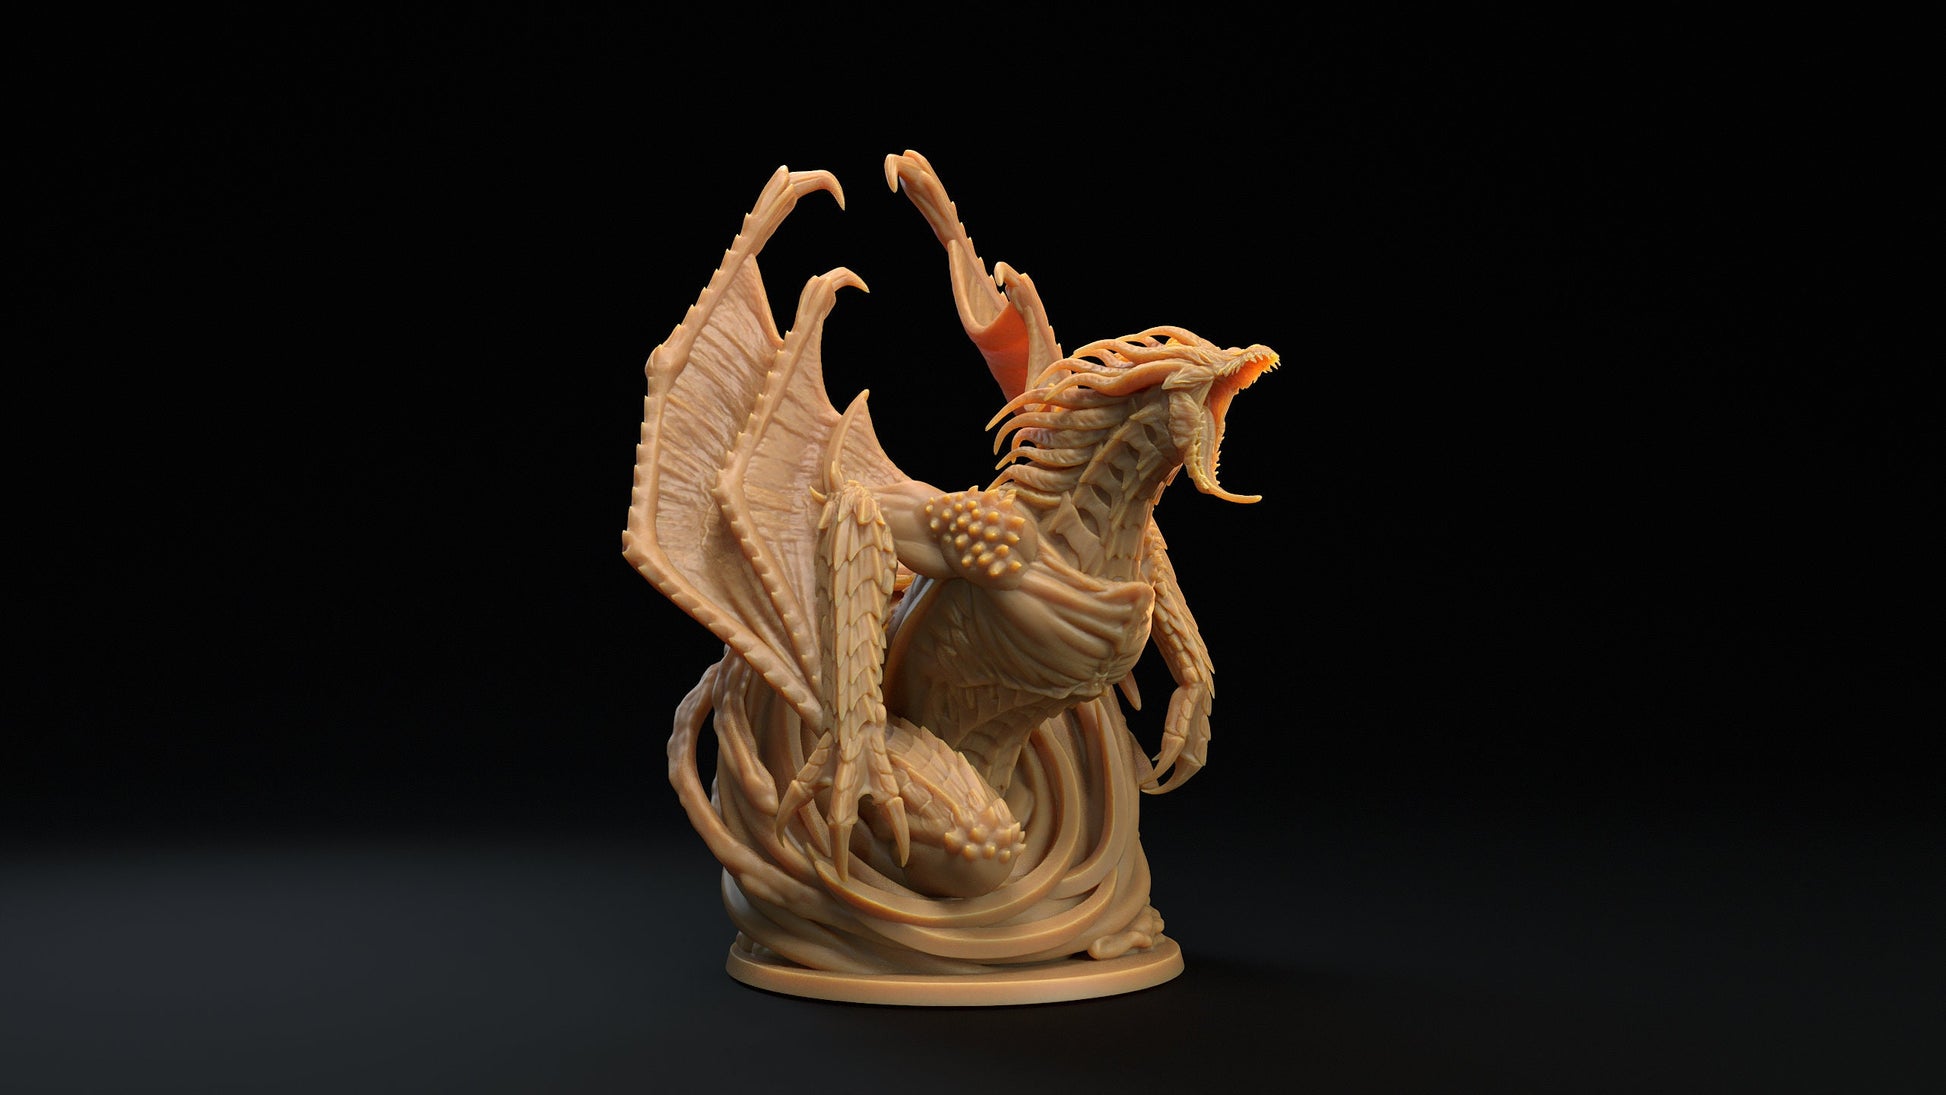 Black Hole Dragon | RPG Miniature for Dungeons and Dragons|Pathfinder|Tabletop Wargaming | Dragon Miniature | Dragon Trappers Lodge